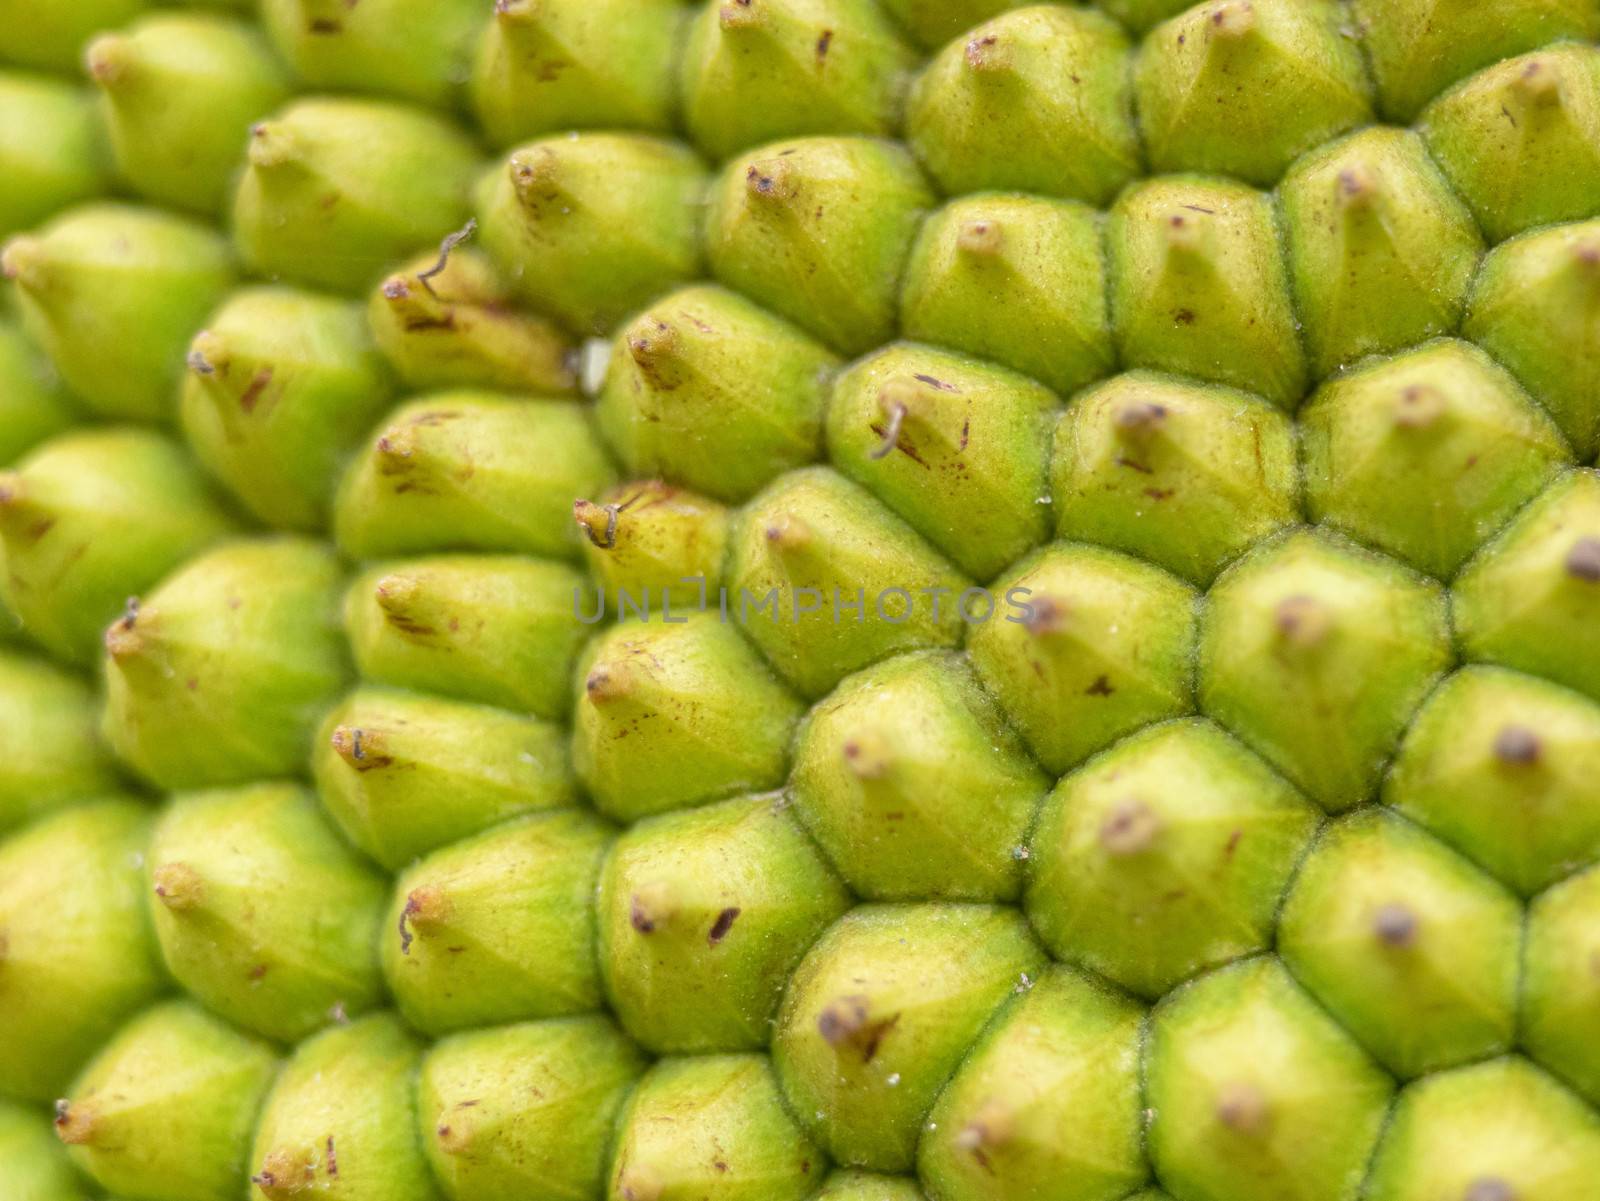 Close up of The jackfruit peel texture, Rough Green surface of tClose up of The jackfruit peel texture, Rough Green surface of tropical fruit with small eye-shaped button that is all around. by TEERASAK